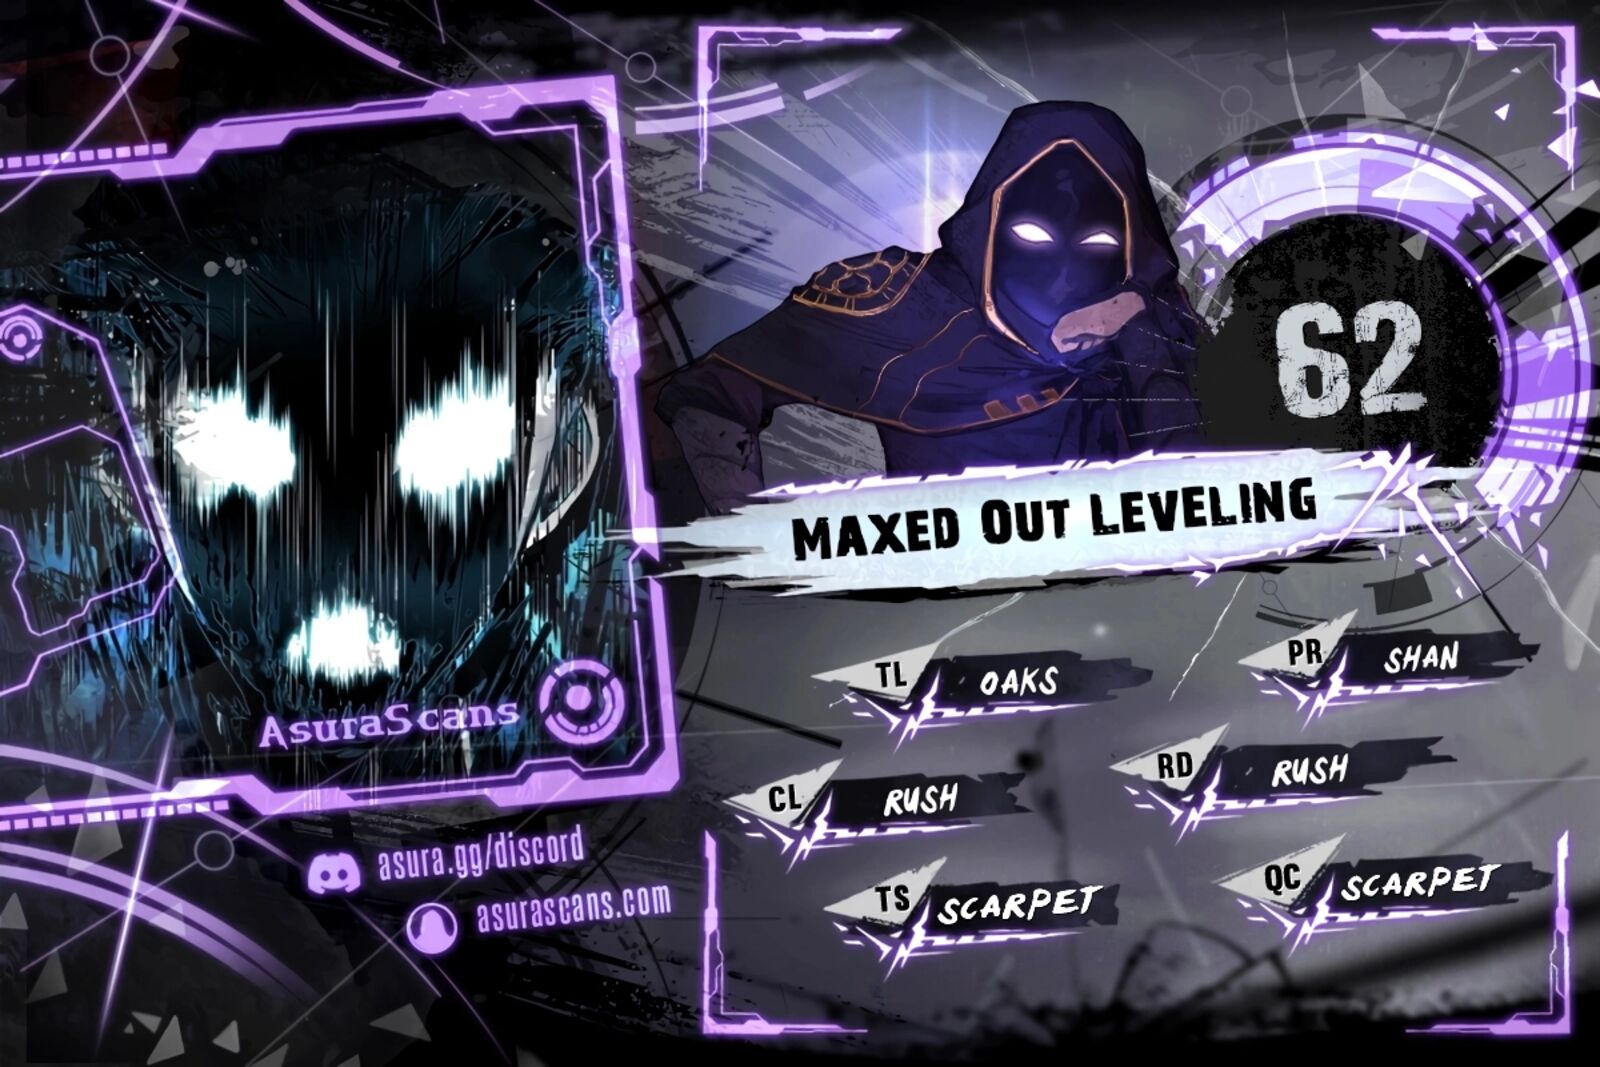 Maxed Out Leveling 62 1